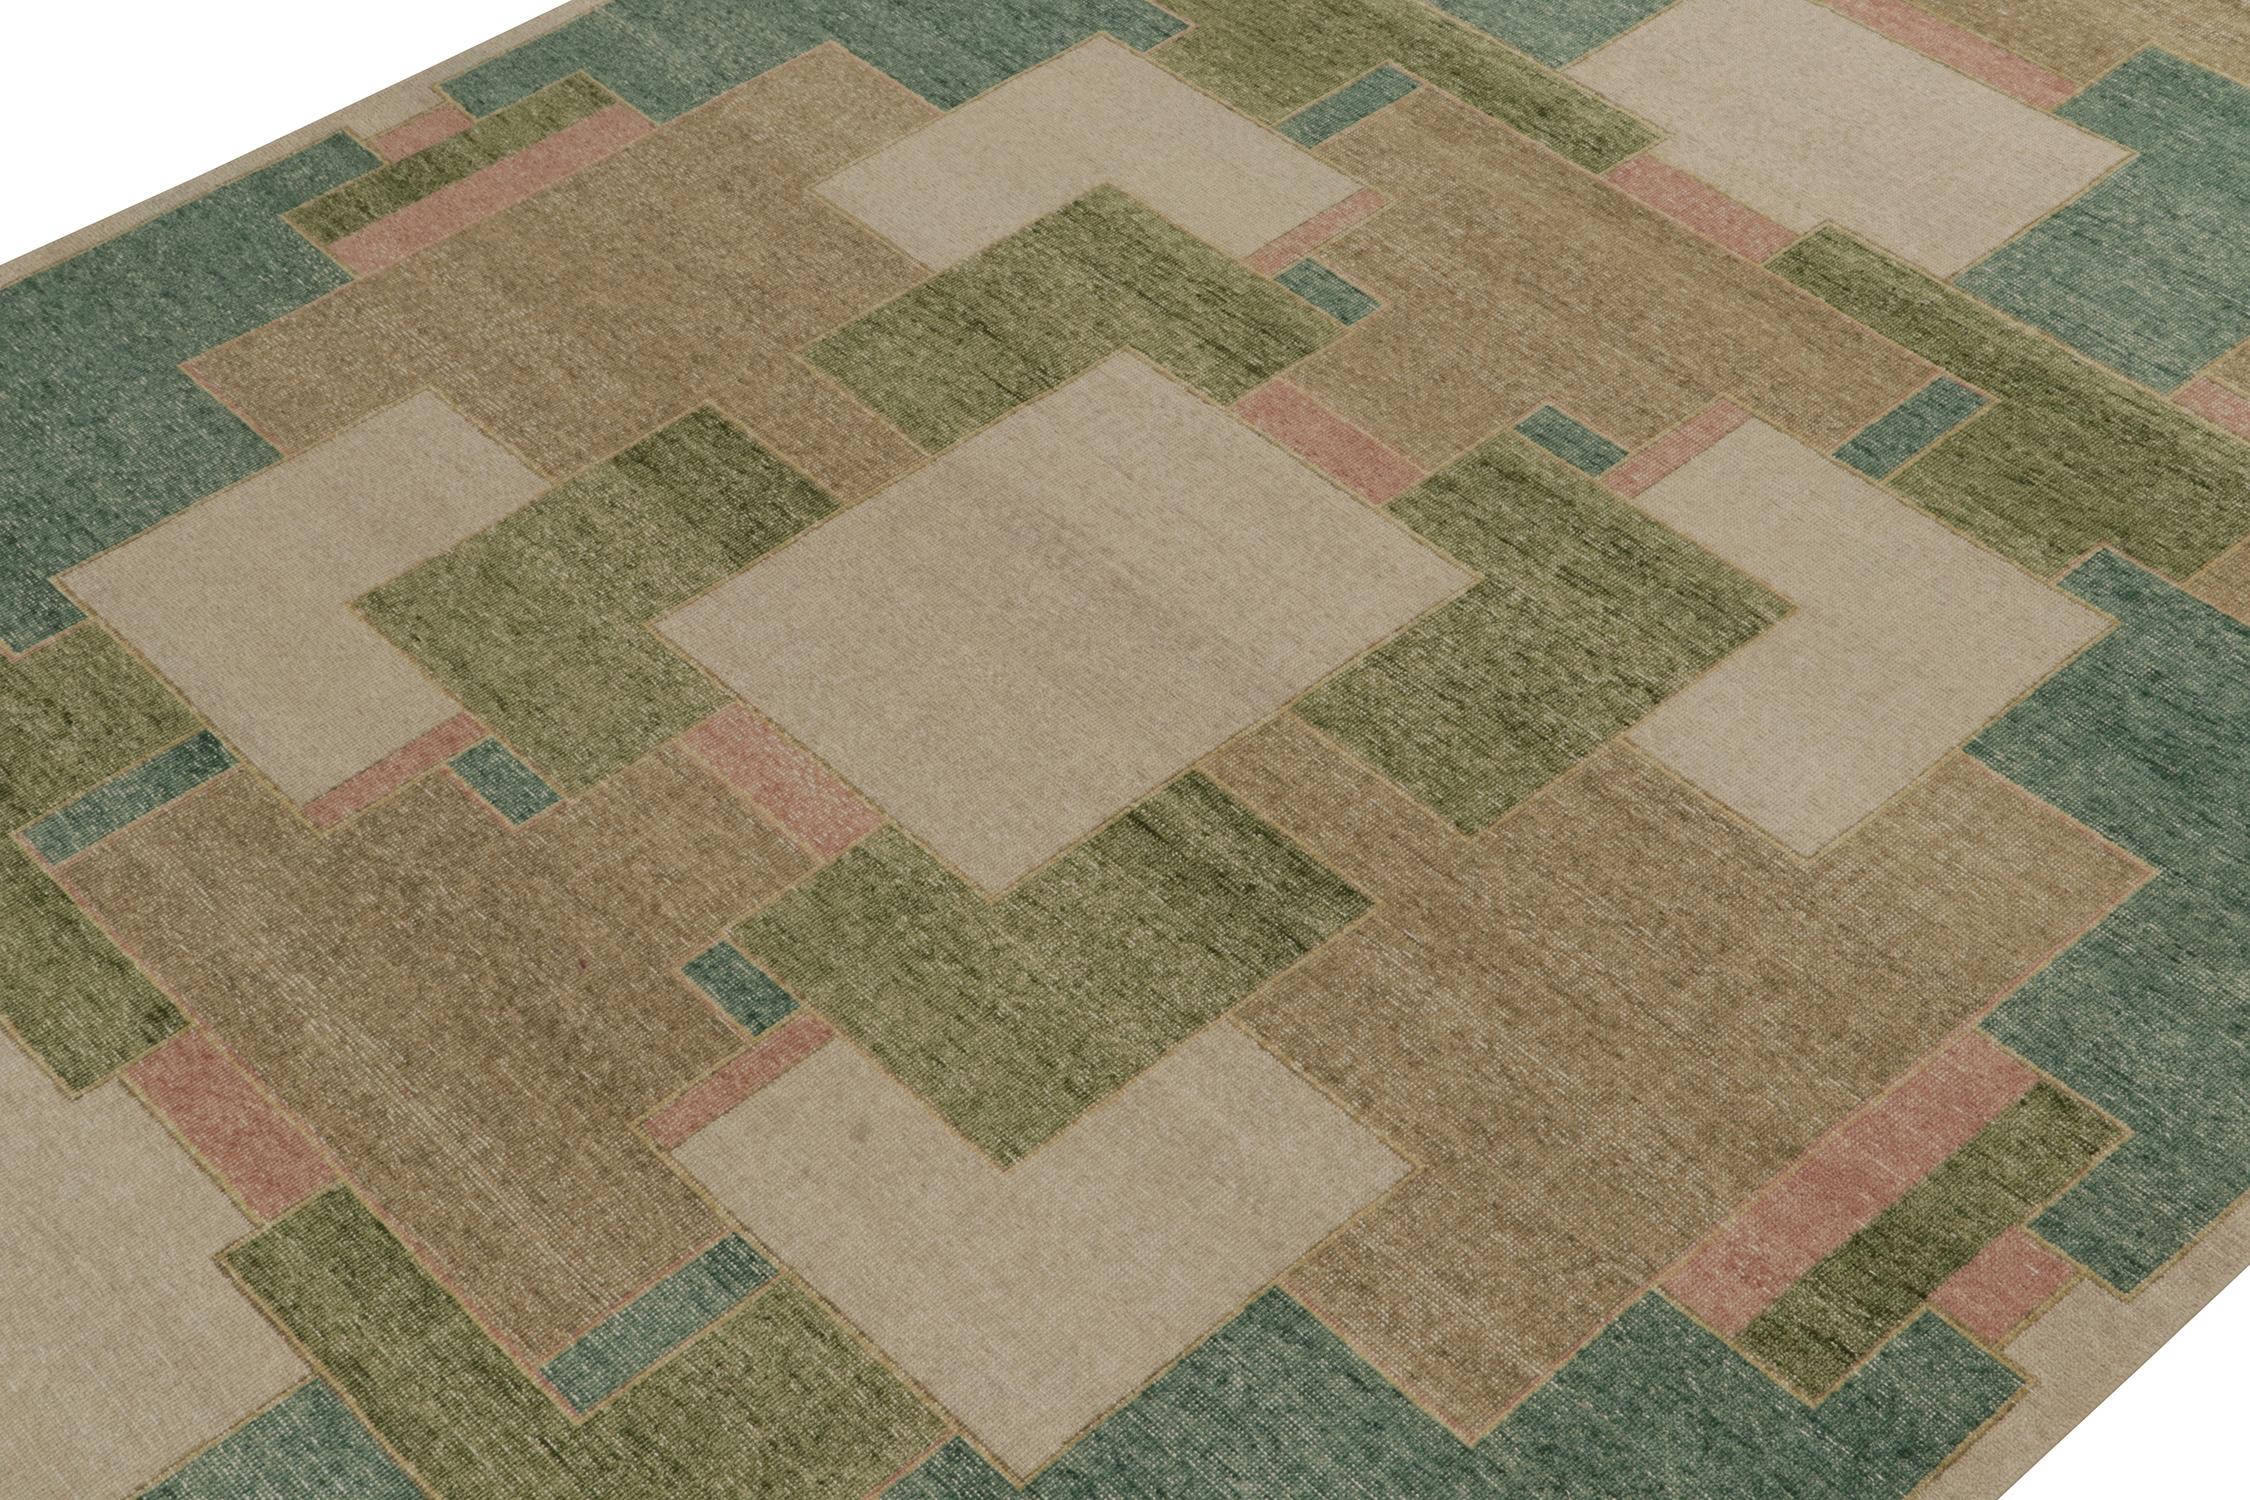 Indian Rug & Kilim’s Distressed Deco Style Rug in Green, Beige-Brown Geometric Patterns For Sale